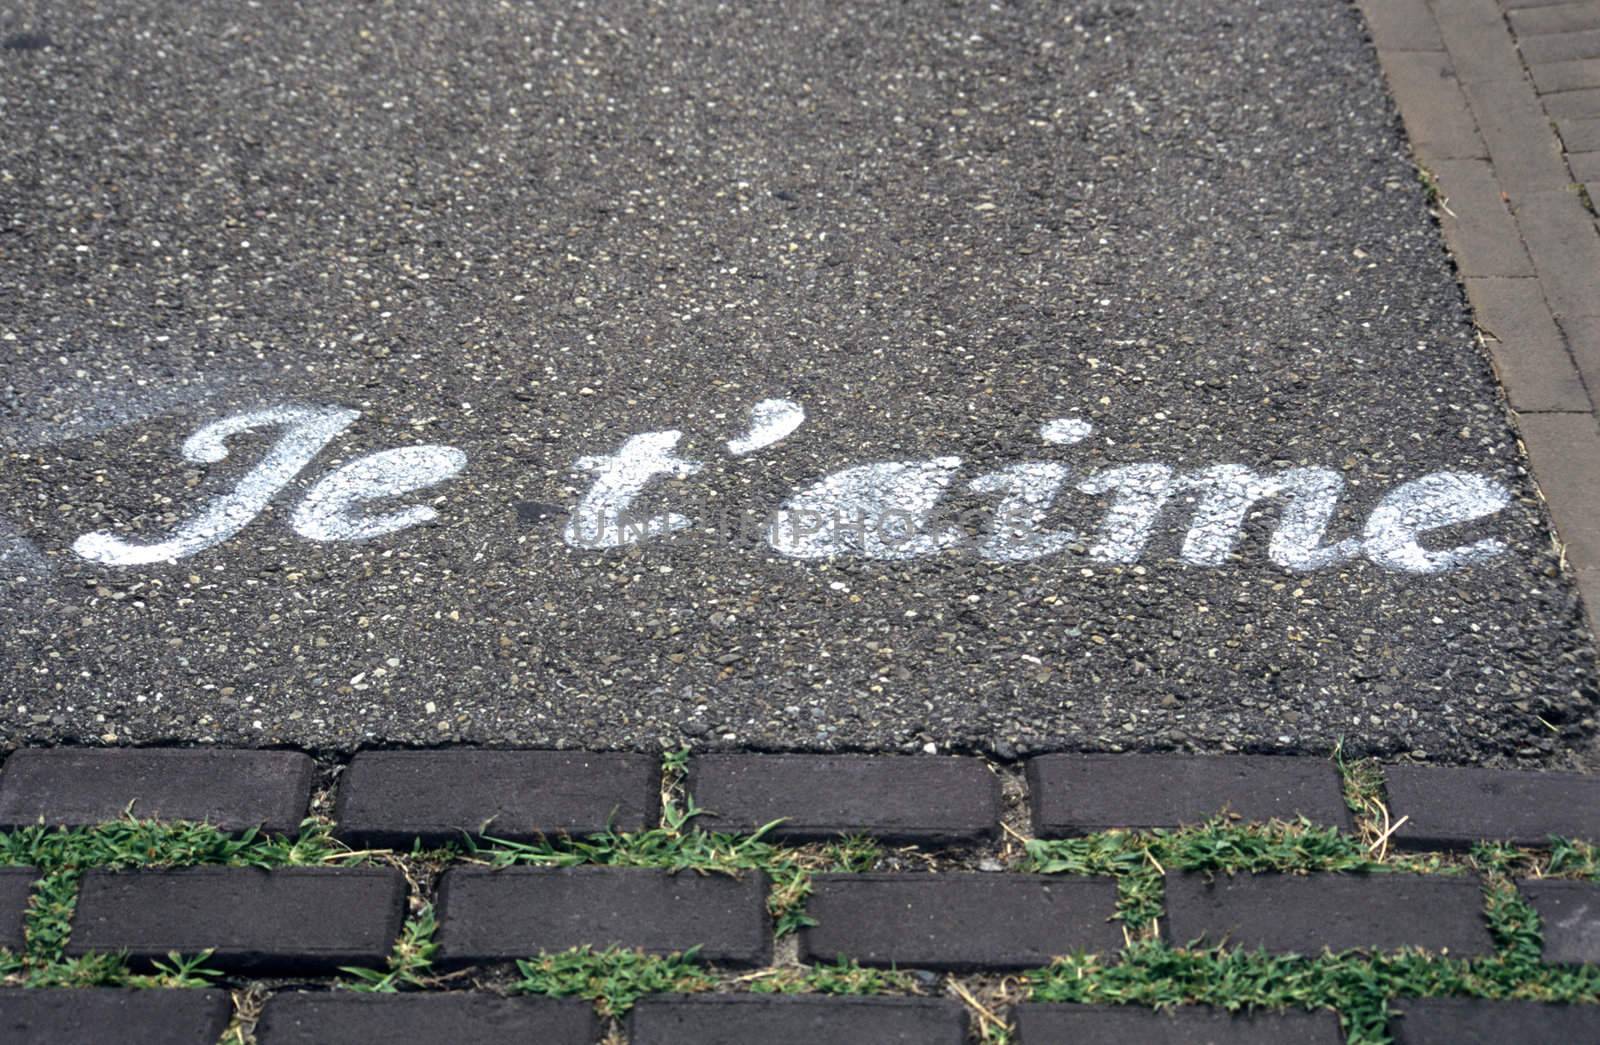 Romantic (but illegal) street grafitti in Amsterdam says I love you in French.